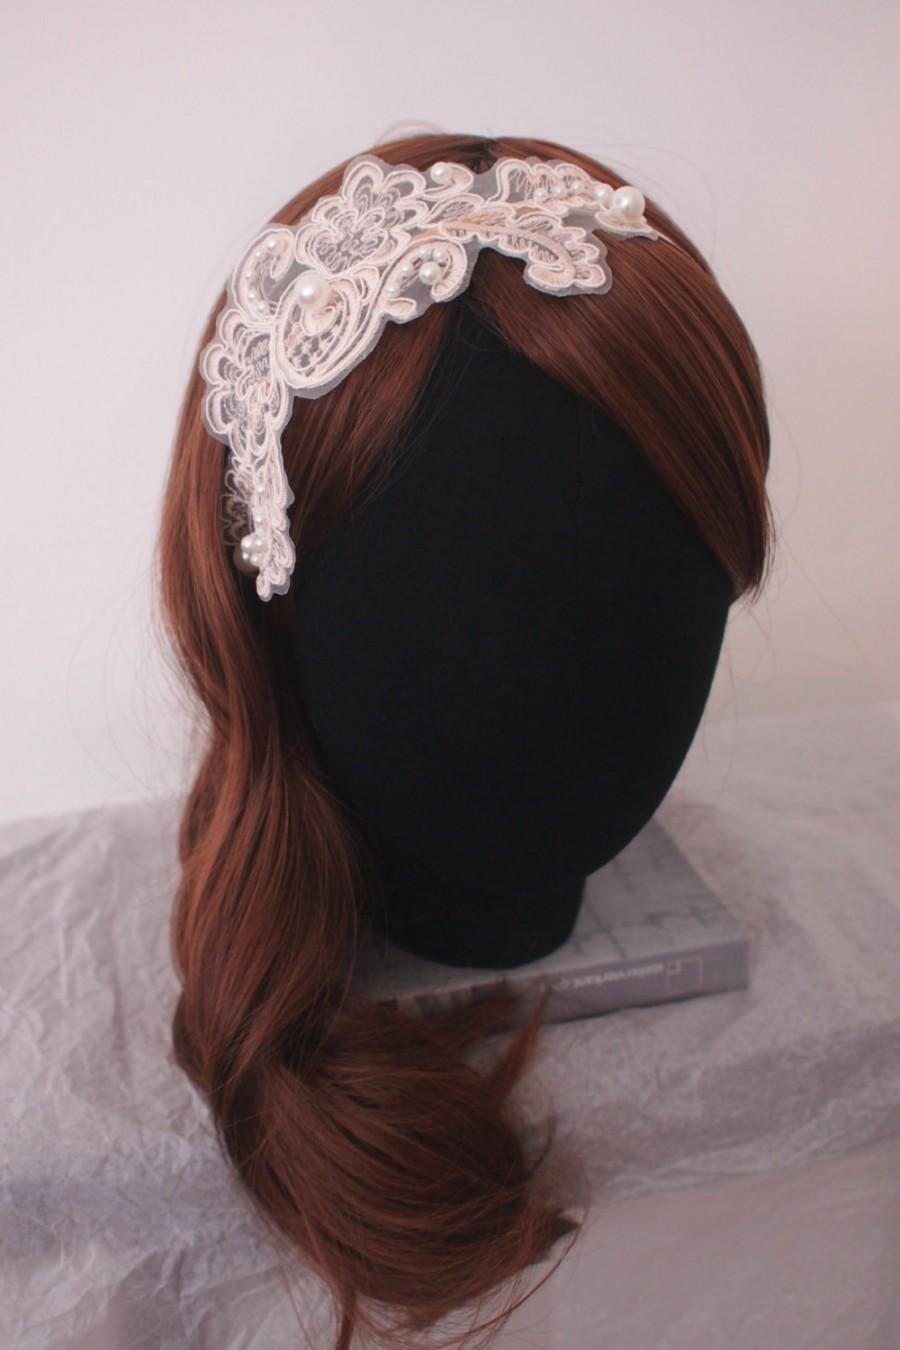 Hochzeit - 1920s' Victorian Style Wedding Headpiece -- Hand Embroidered Pearls on Lace Headband -- for Bridal /Bridesmaid / Formal Party